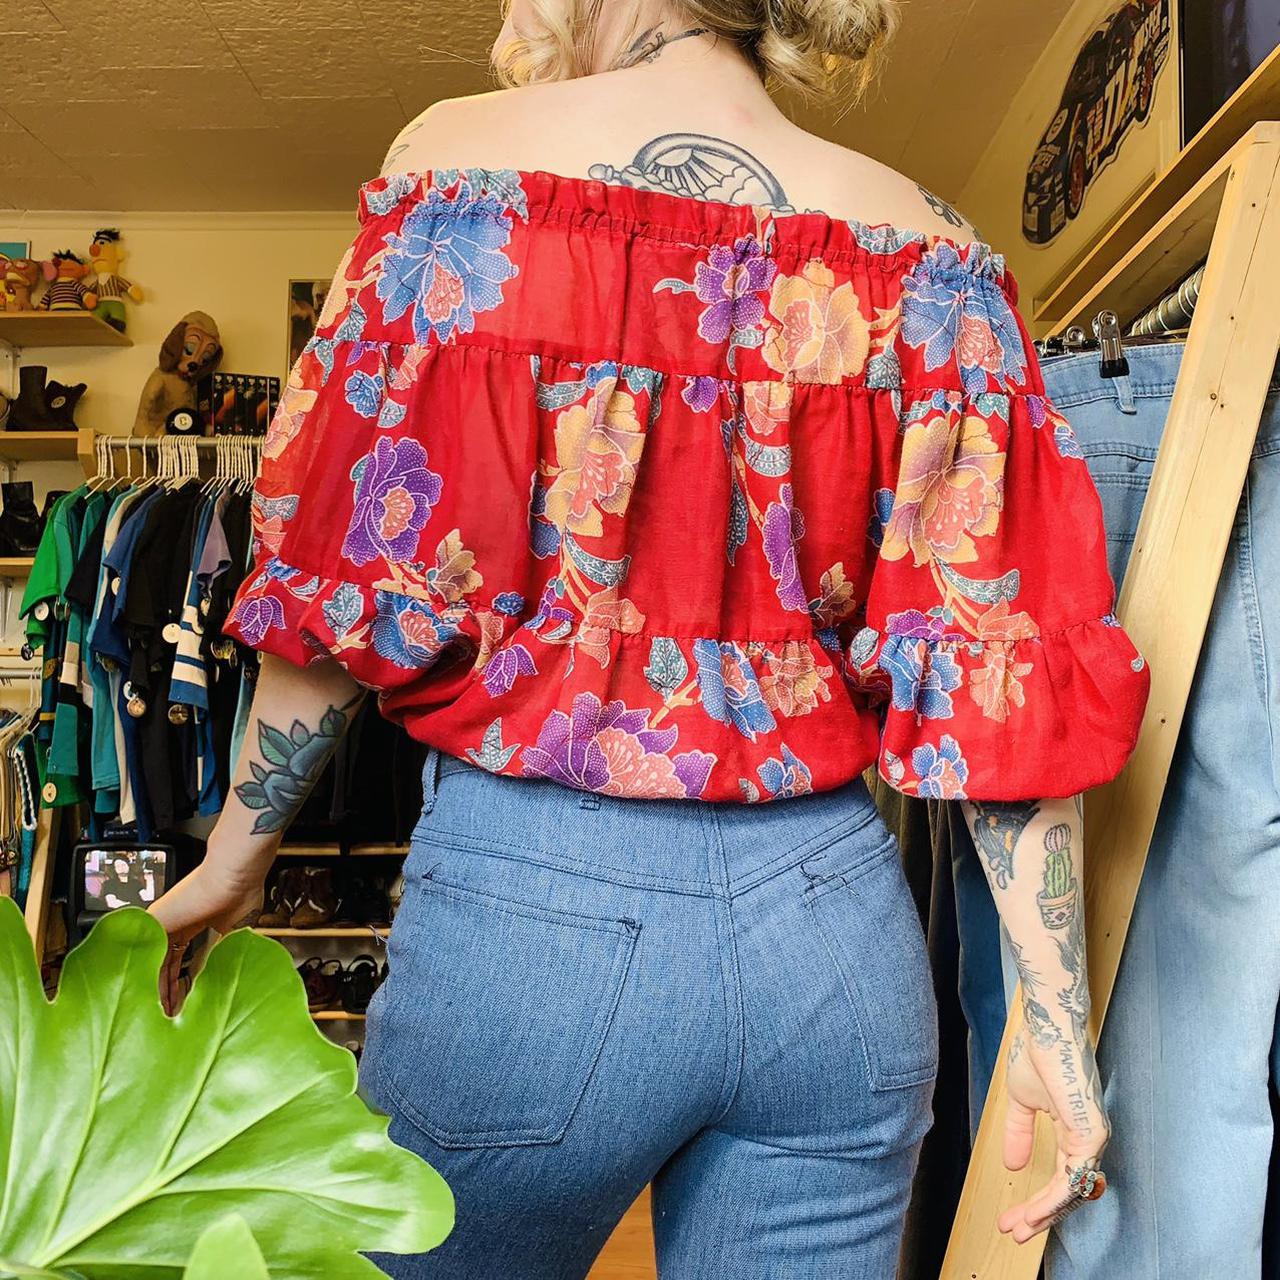 Product Image 2 - 70’s floral peasant blouse. Why